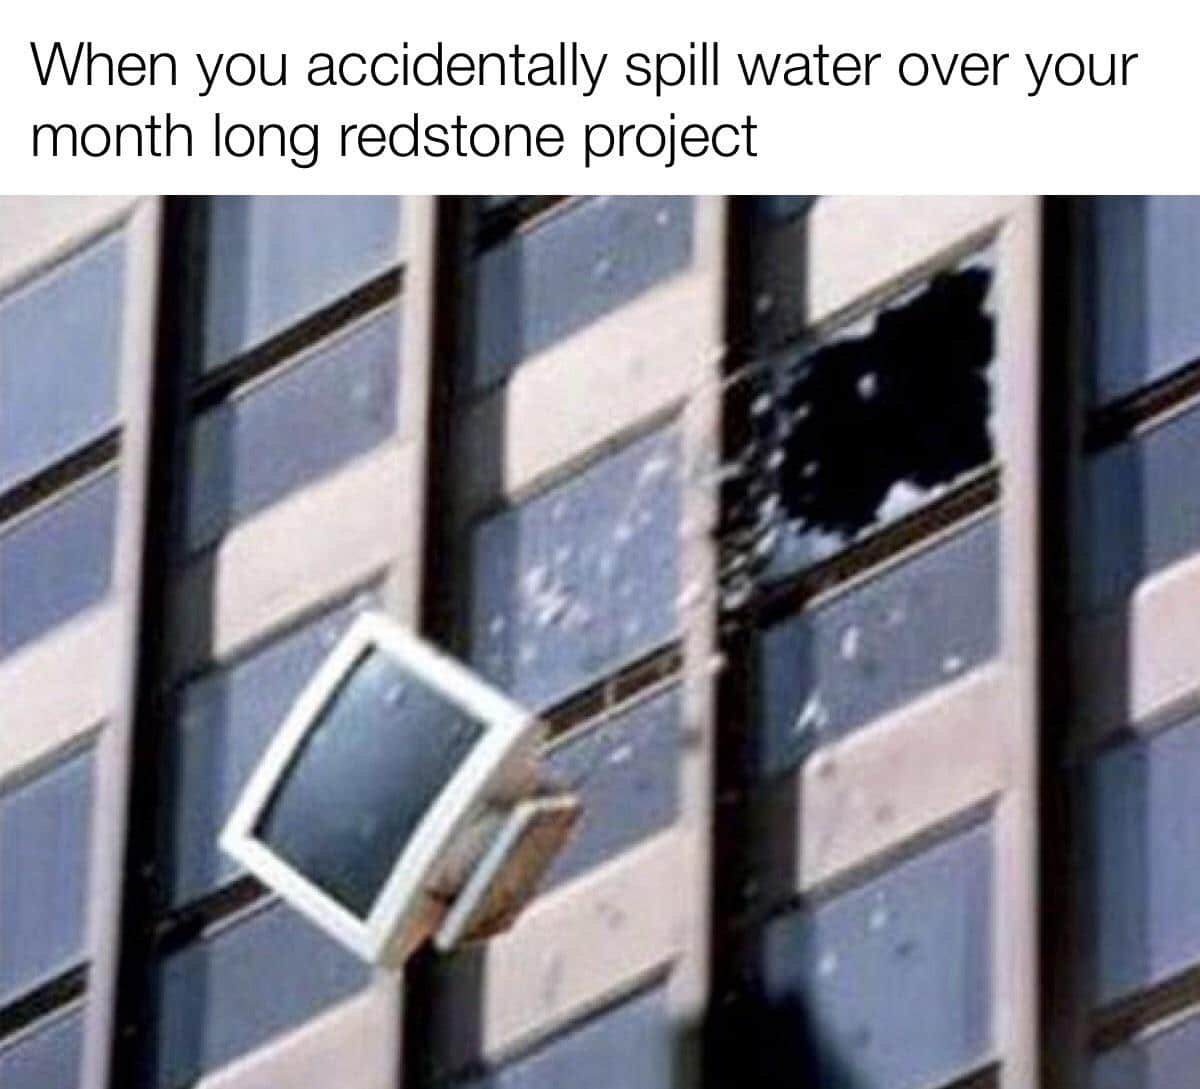 minecraft minecraft-memes minecraft text: When you accidentally spill water over your month long redstone project 